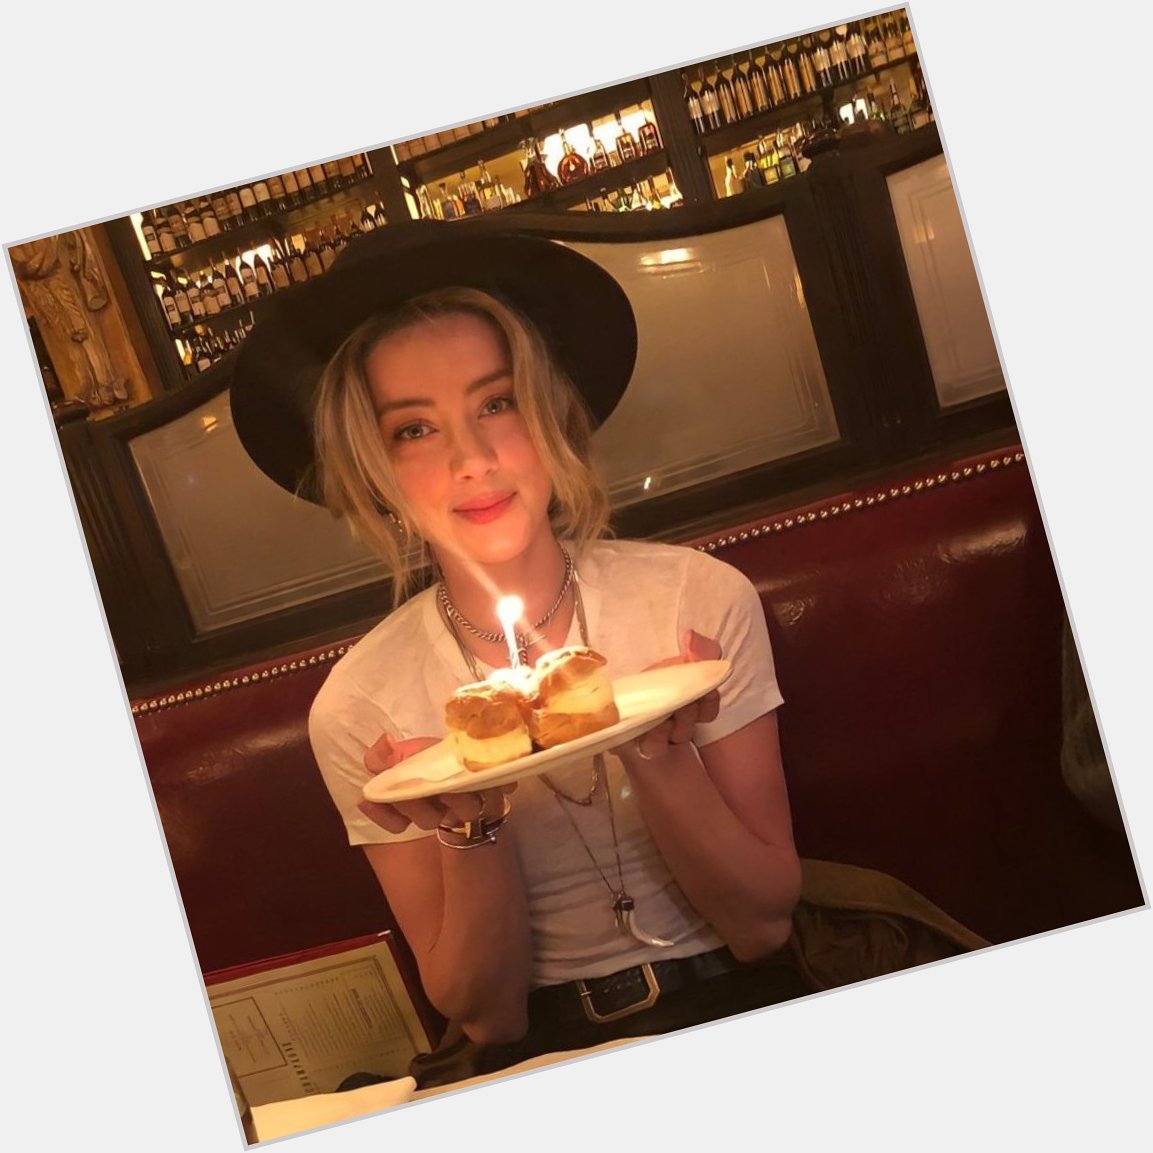 Happy Birthday to literally the most gorgeous person on the planet:
Miss Amber Heard 